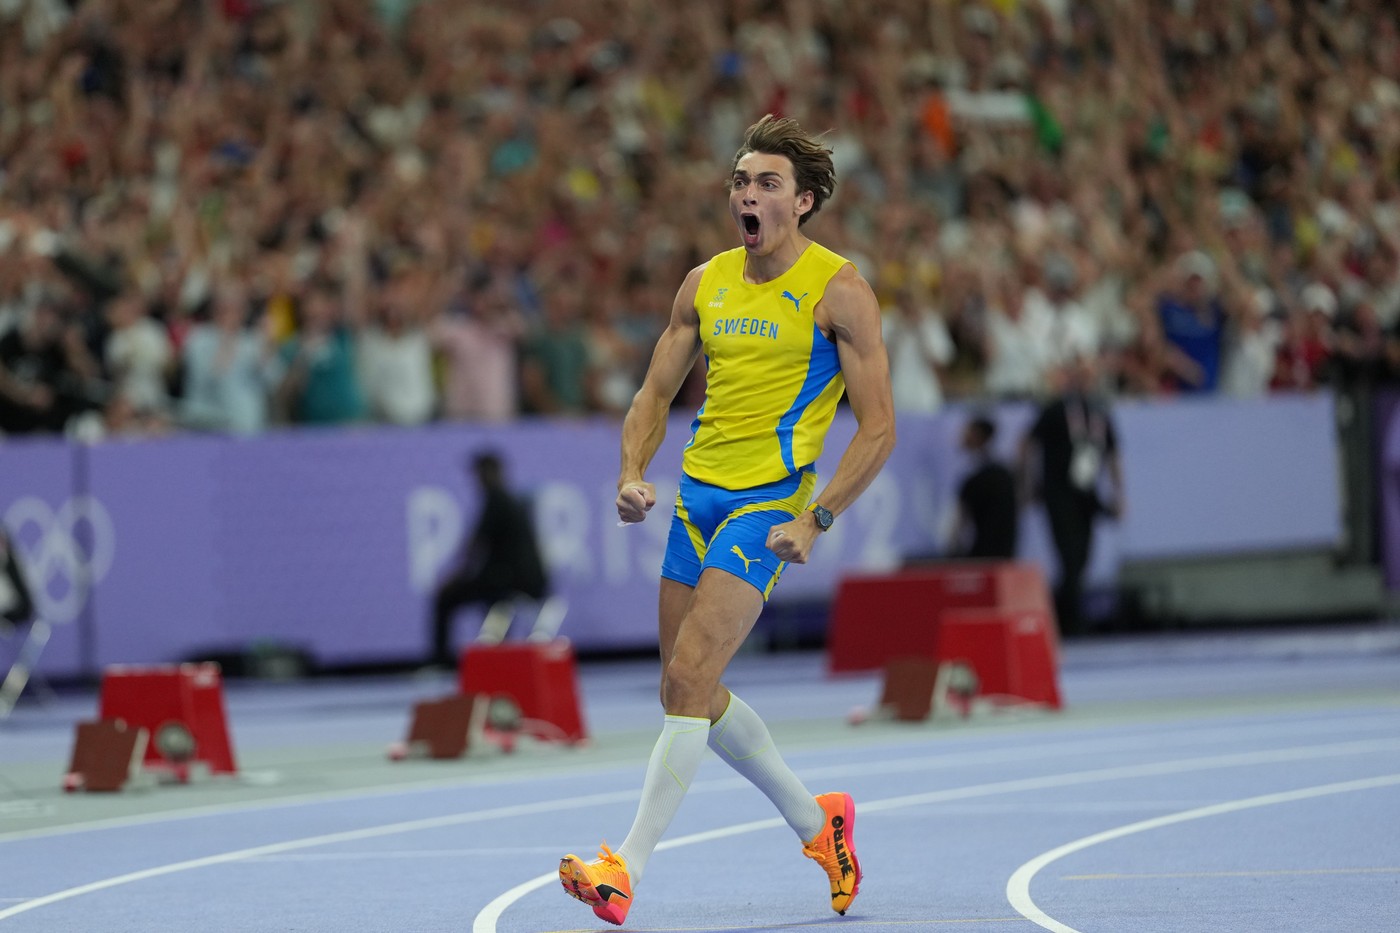 Armand Duplantis of Sweden celebrates after winning gold and setting a new World Record in the Men's Pole Vault
Paris 2024 Olympic Games, Day Ten, Paris, France - 05 Aug 2024,Image: 896314390, License: Rights-managed, Restrictions: , Model Release: no